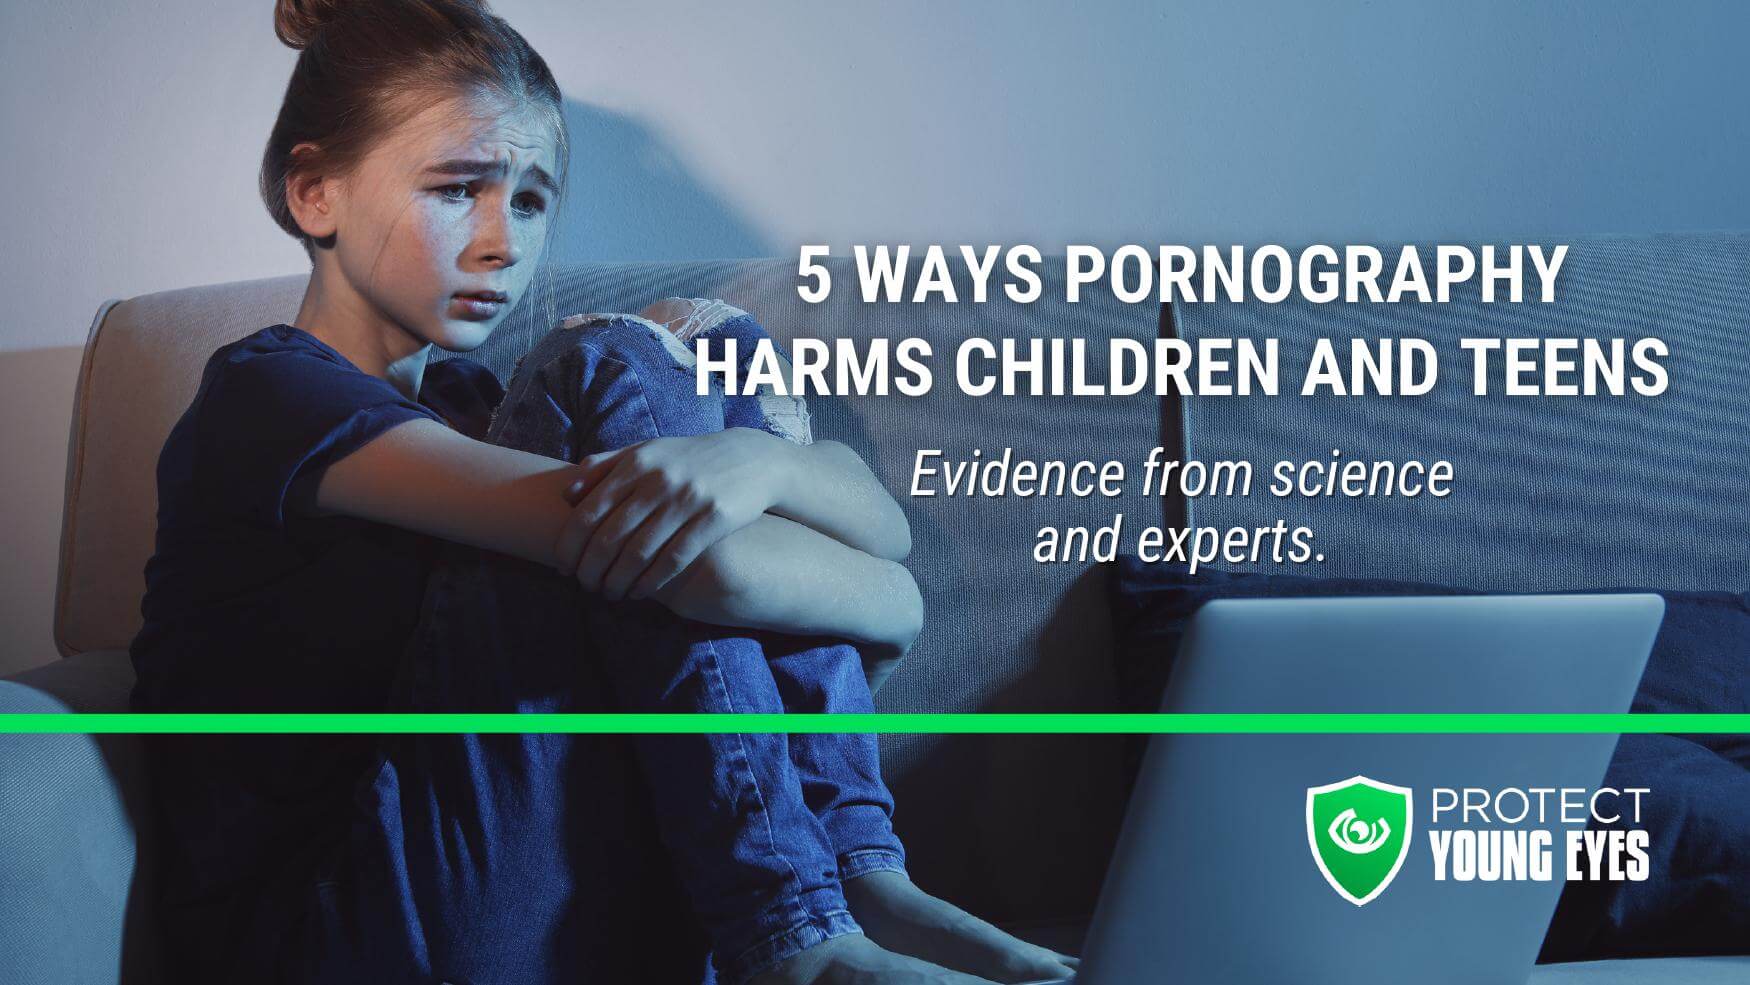 The Affect Of Porn - 5 Ways Pornography Harms Children and Teens - Protect Young Eyes